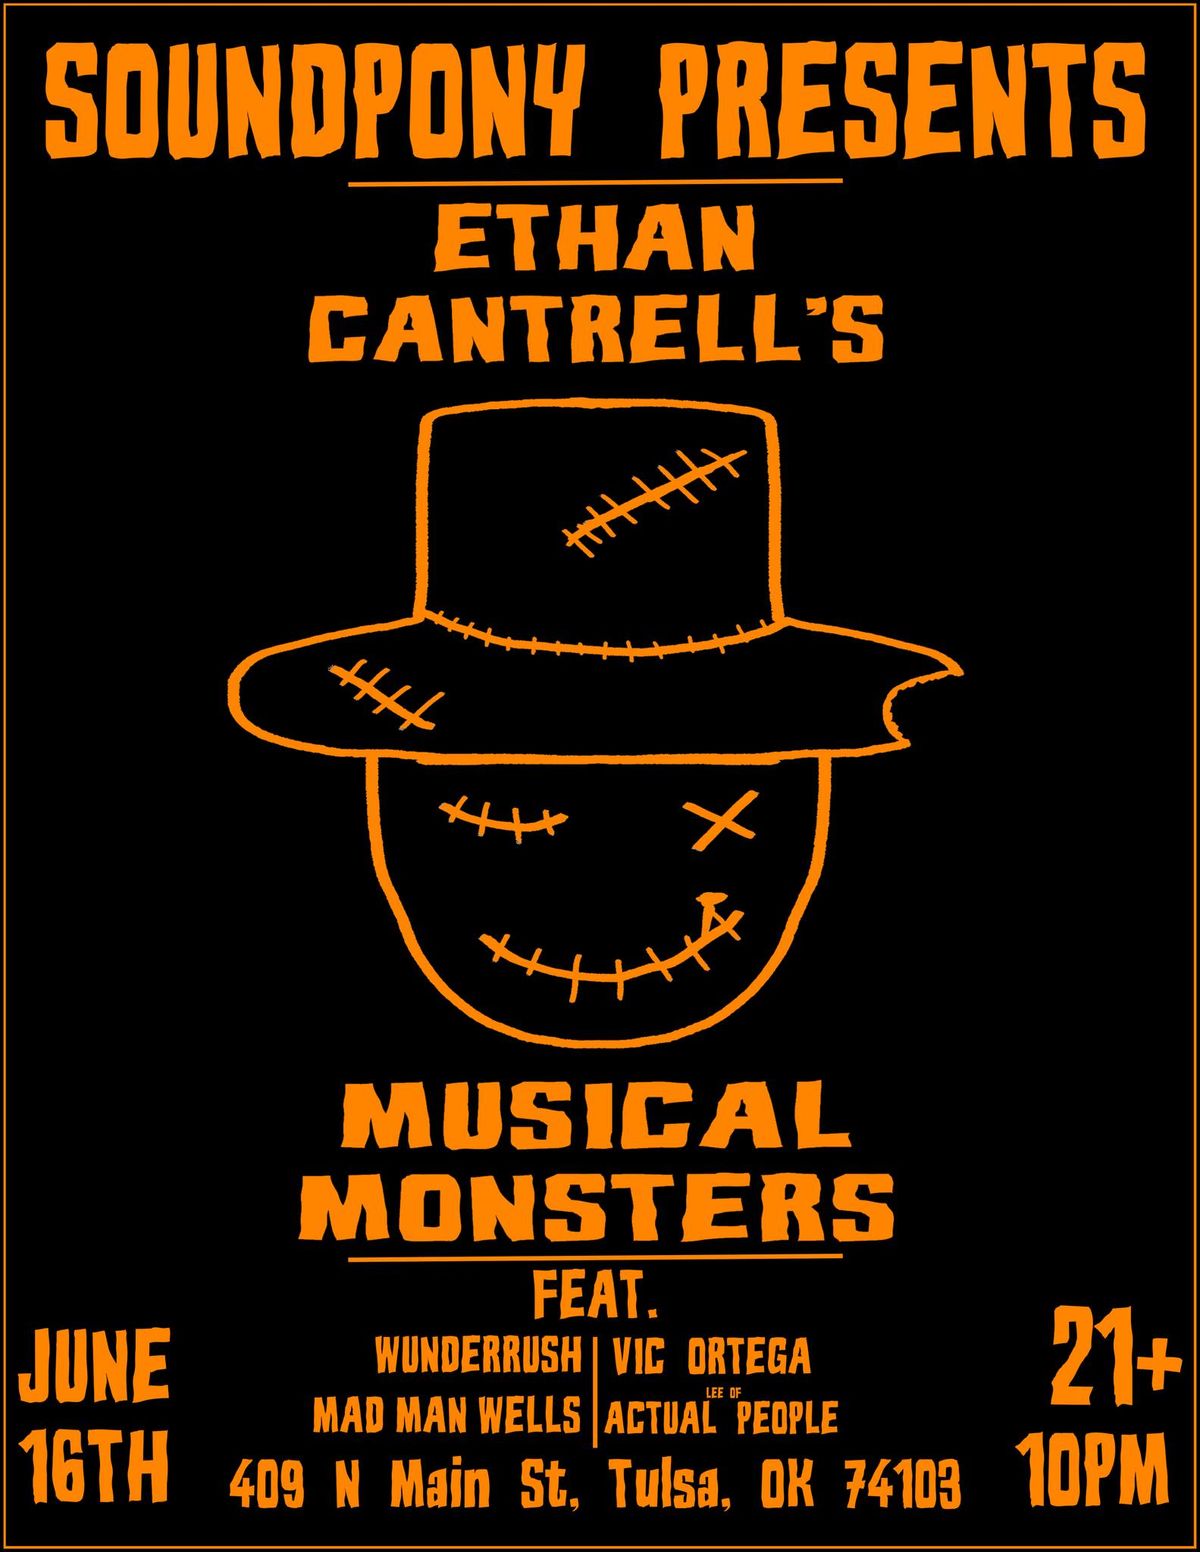 Ethan Cantrell's Musical Monsters feat. Wunderrush, Vic Ortega, Mad Man Wells, Lee of Actual People